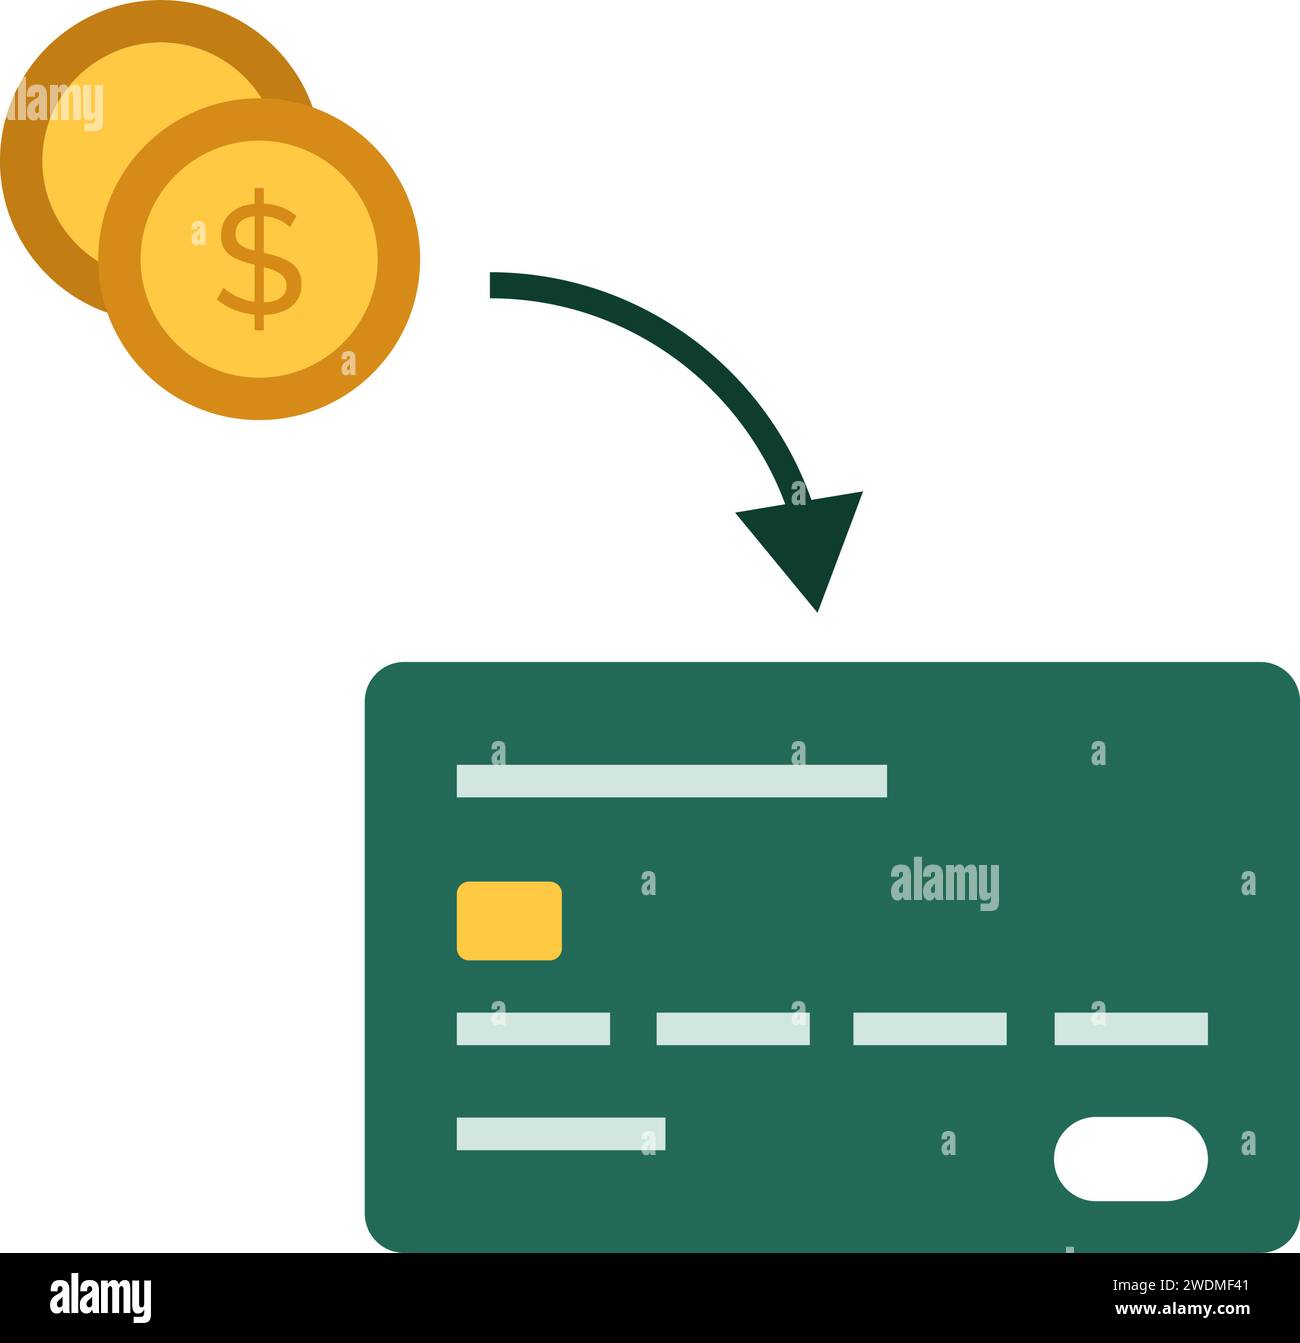 Prepaid debit card isolated icon, banking and payments concept Stock Vector